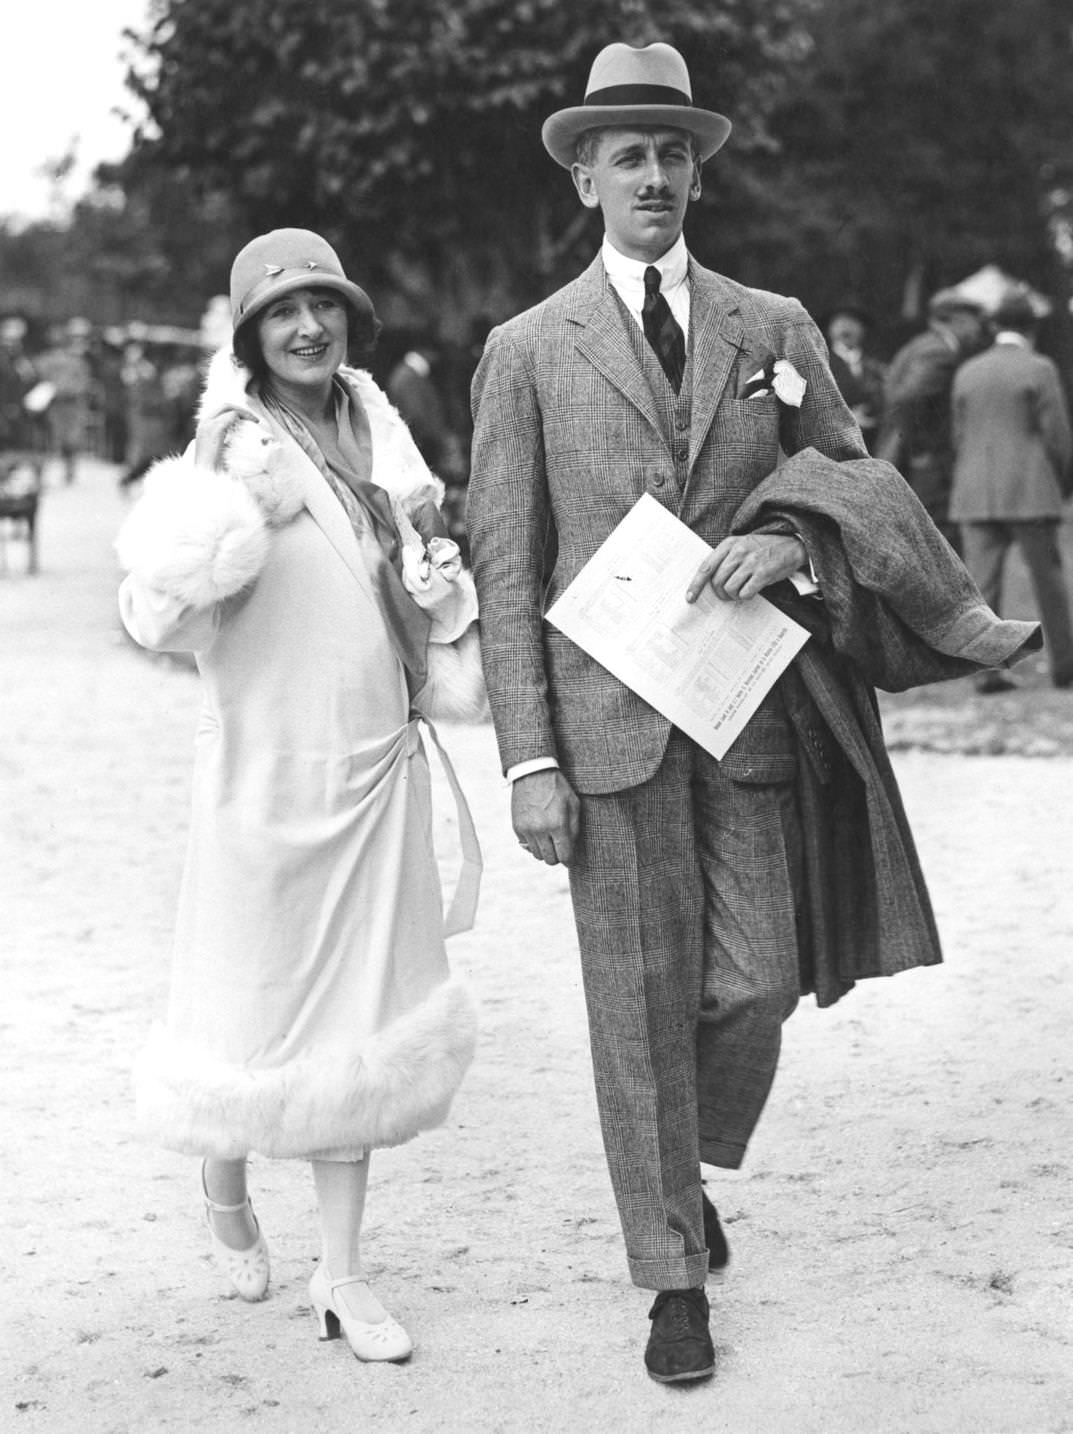 Captain Weldon Champneys with his wife at Deauville, Normandy, France, 26th August 1924.